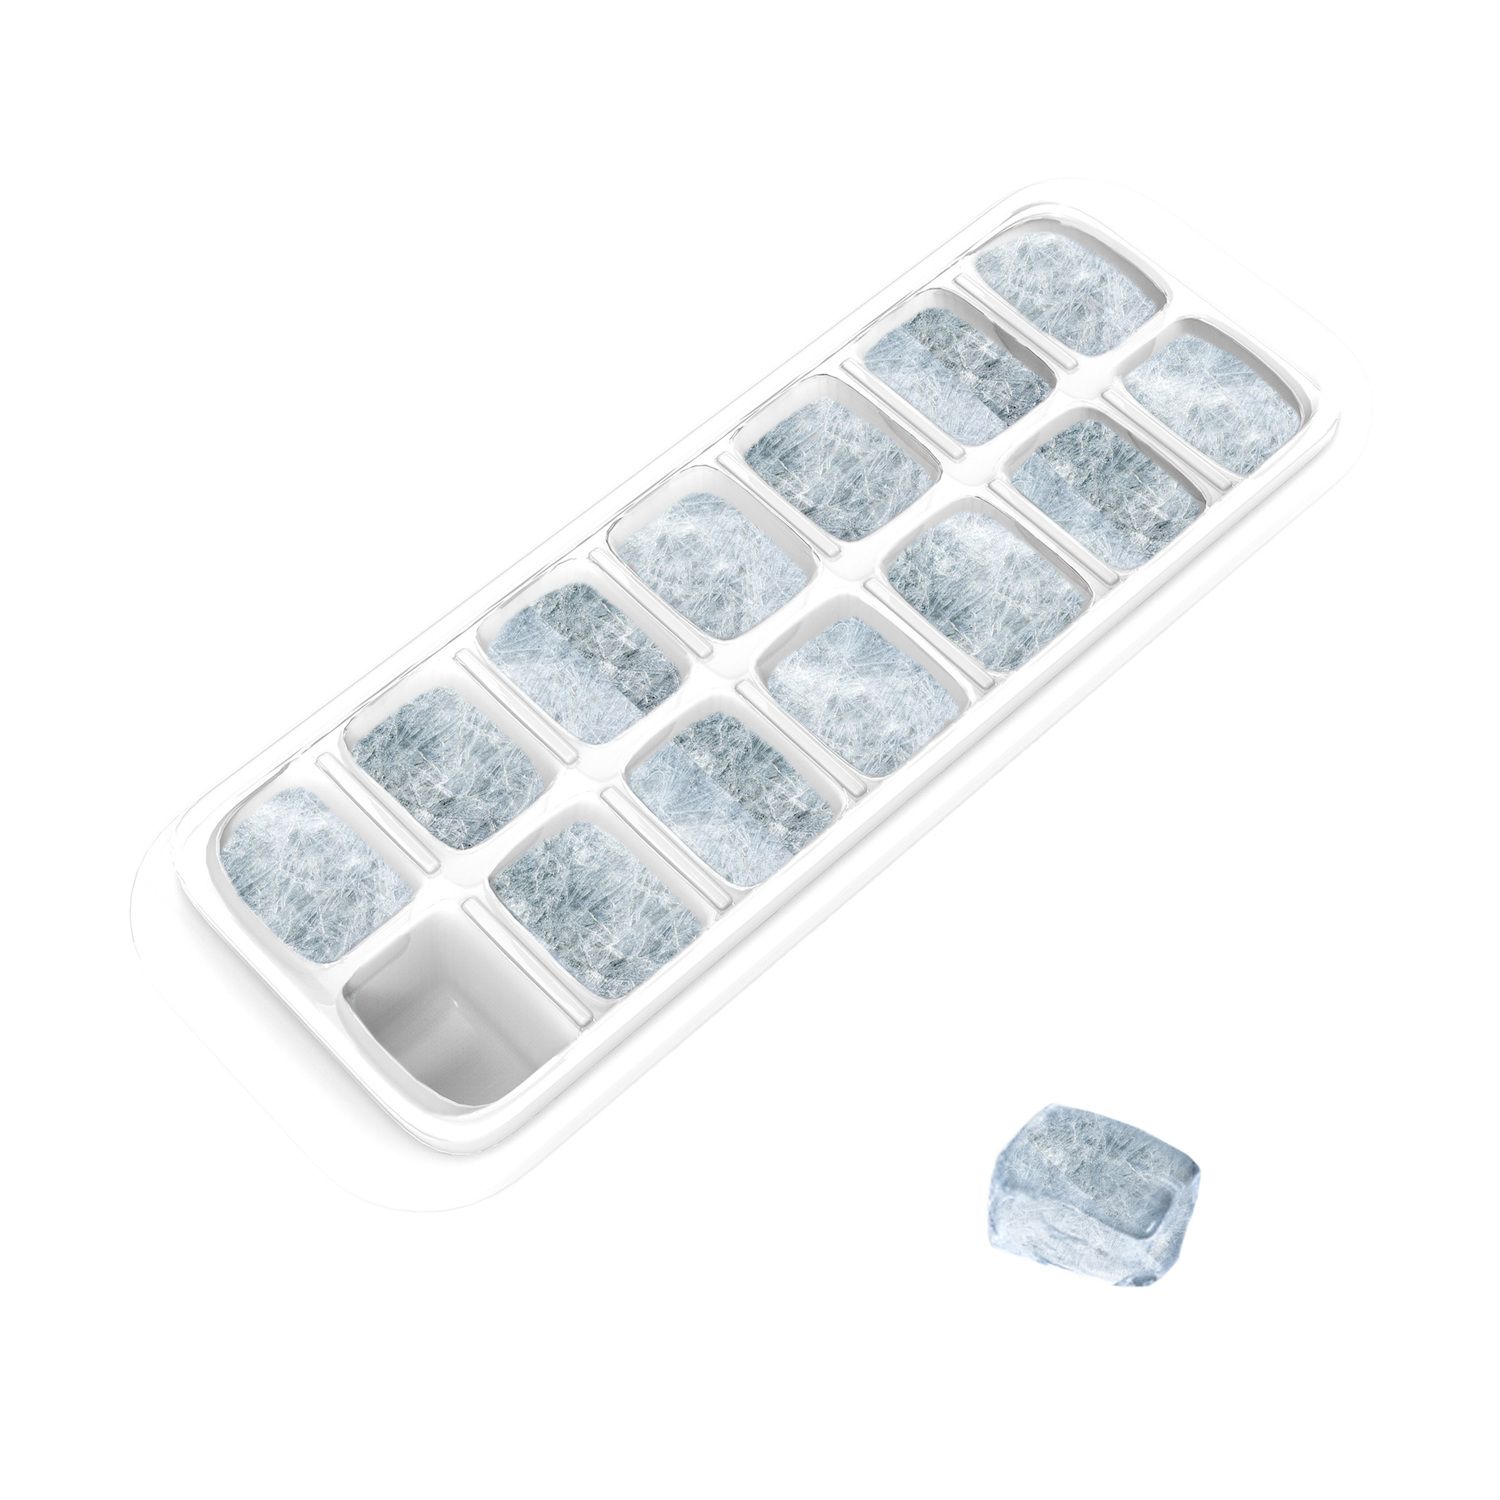 TrueZoo Cold Feet: Animal Paws Silicone Ice Cube Tray by TrueZoo-12 per case